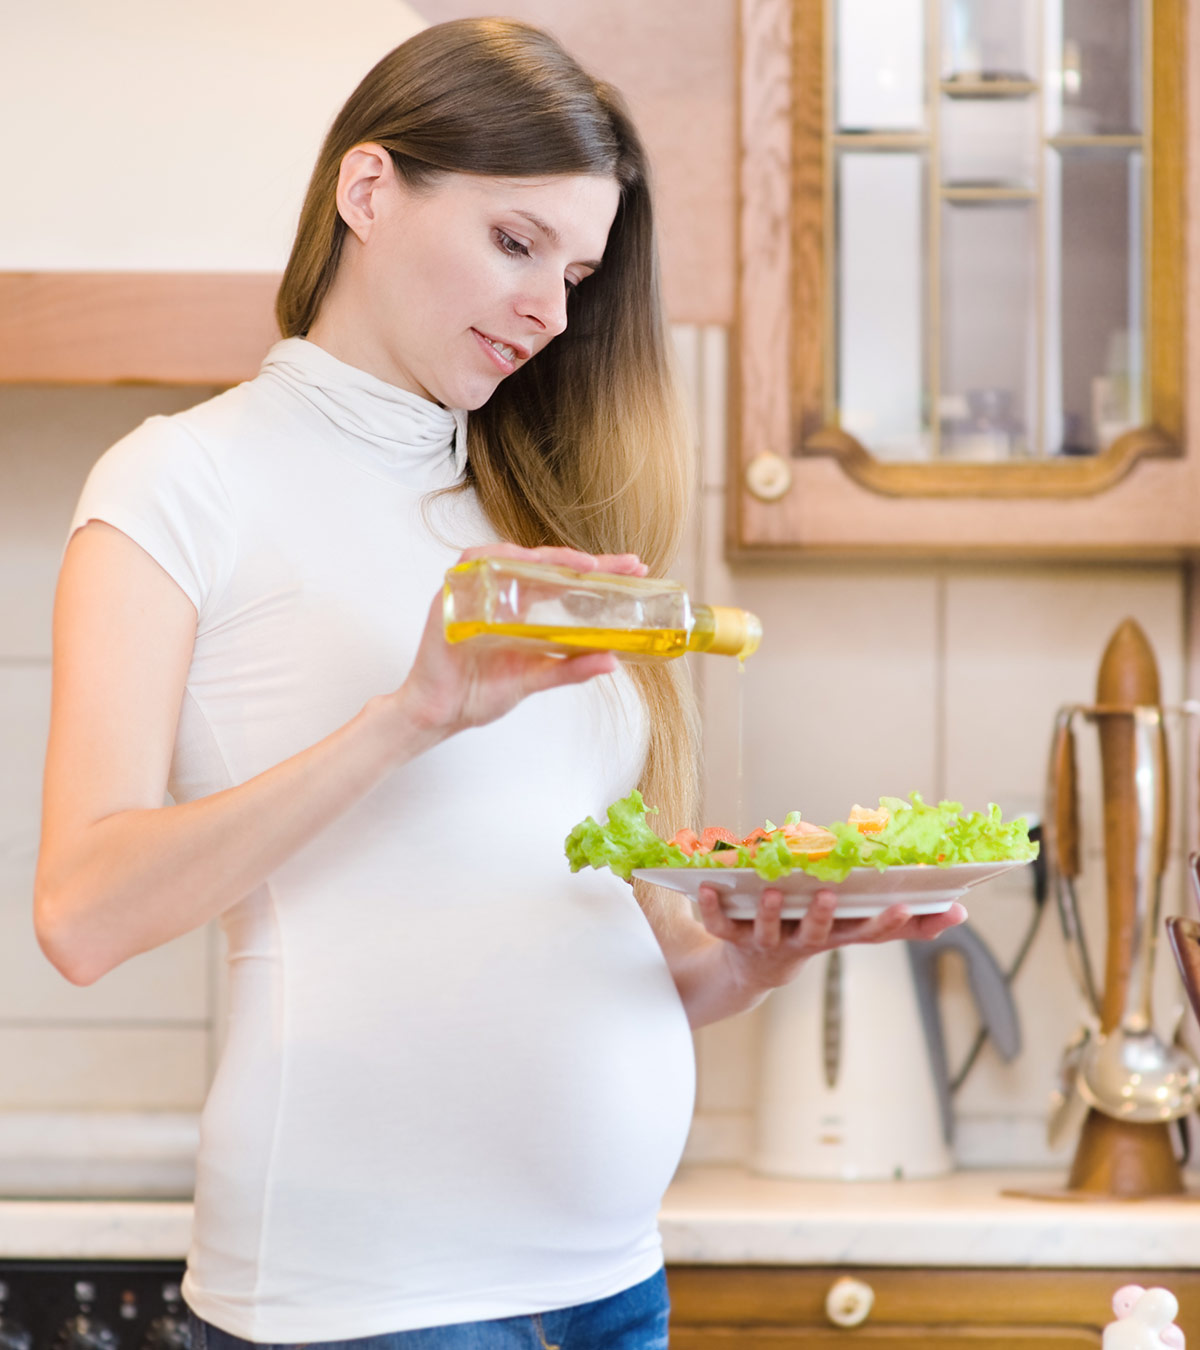 olive oil during pregnancy and its benefits